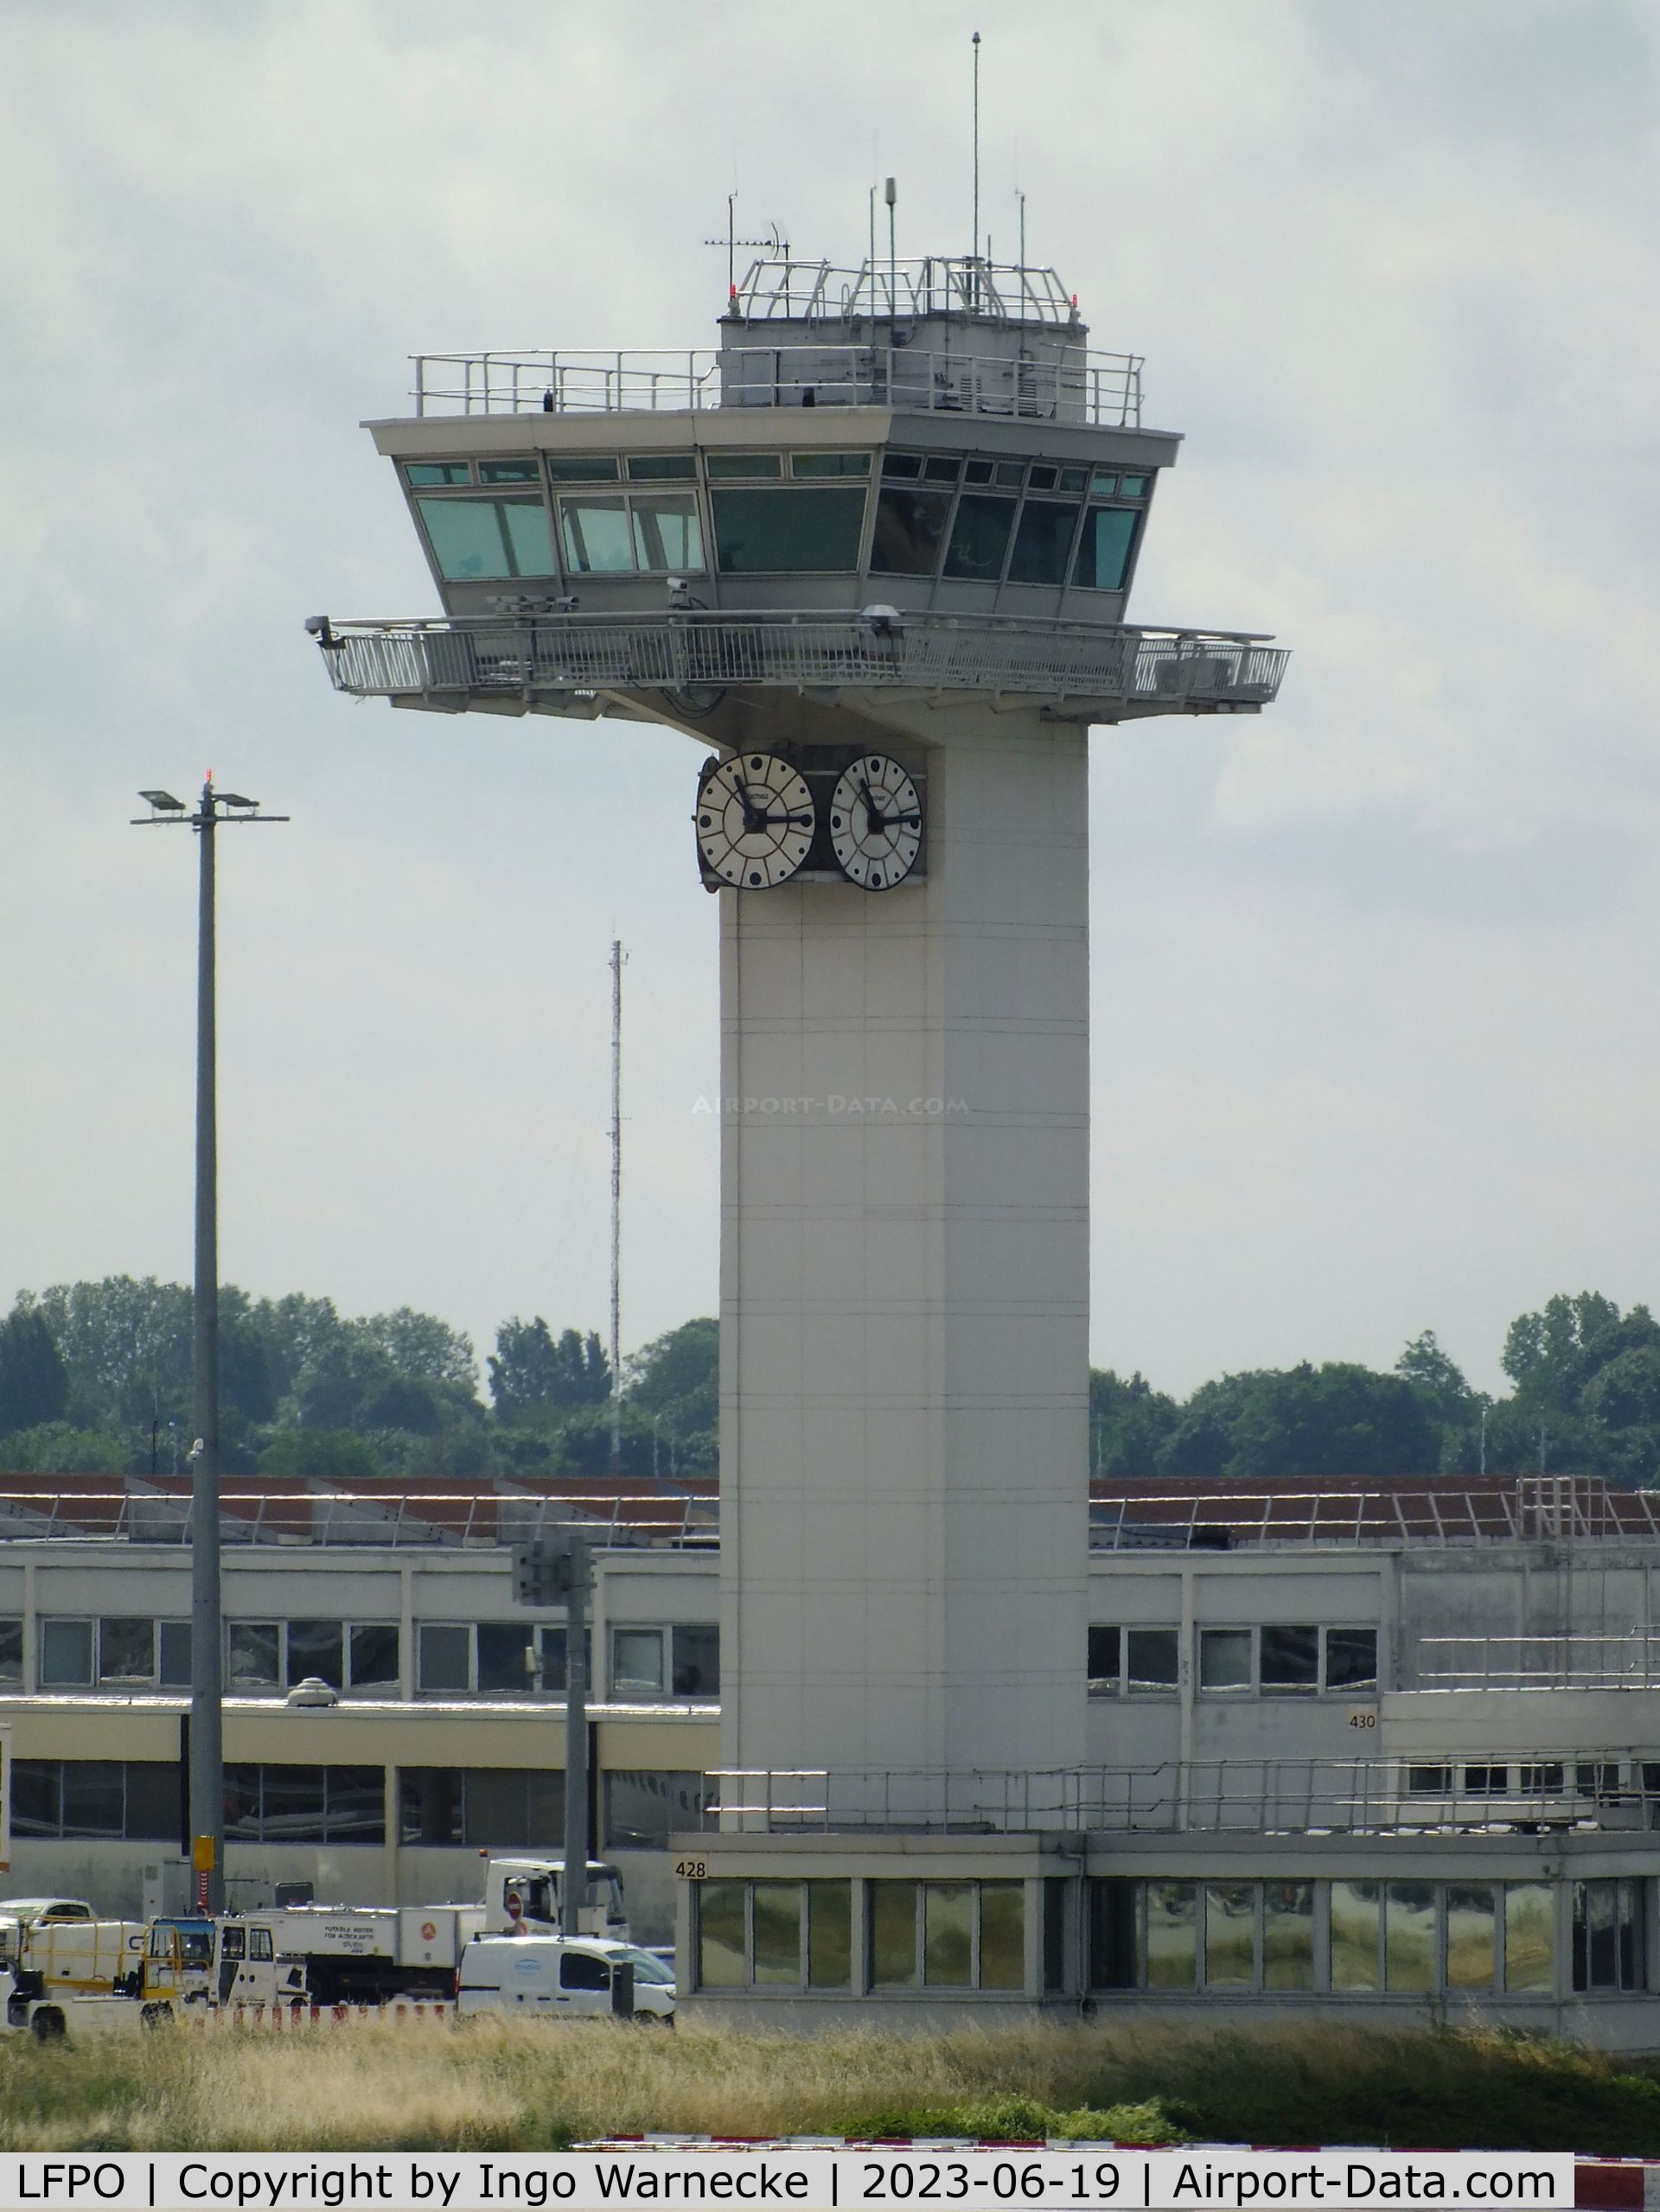 Paris Orly Airport, Orly (near Paris) France (LFPO) - southern tower at Paris/Orly airport